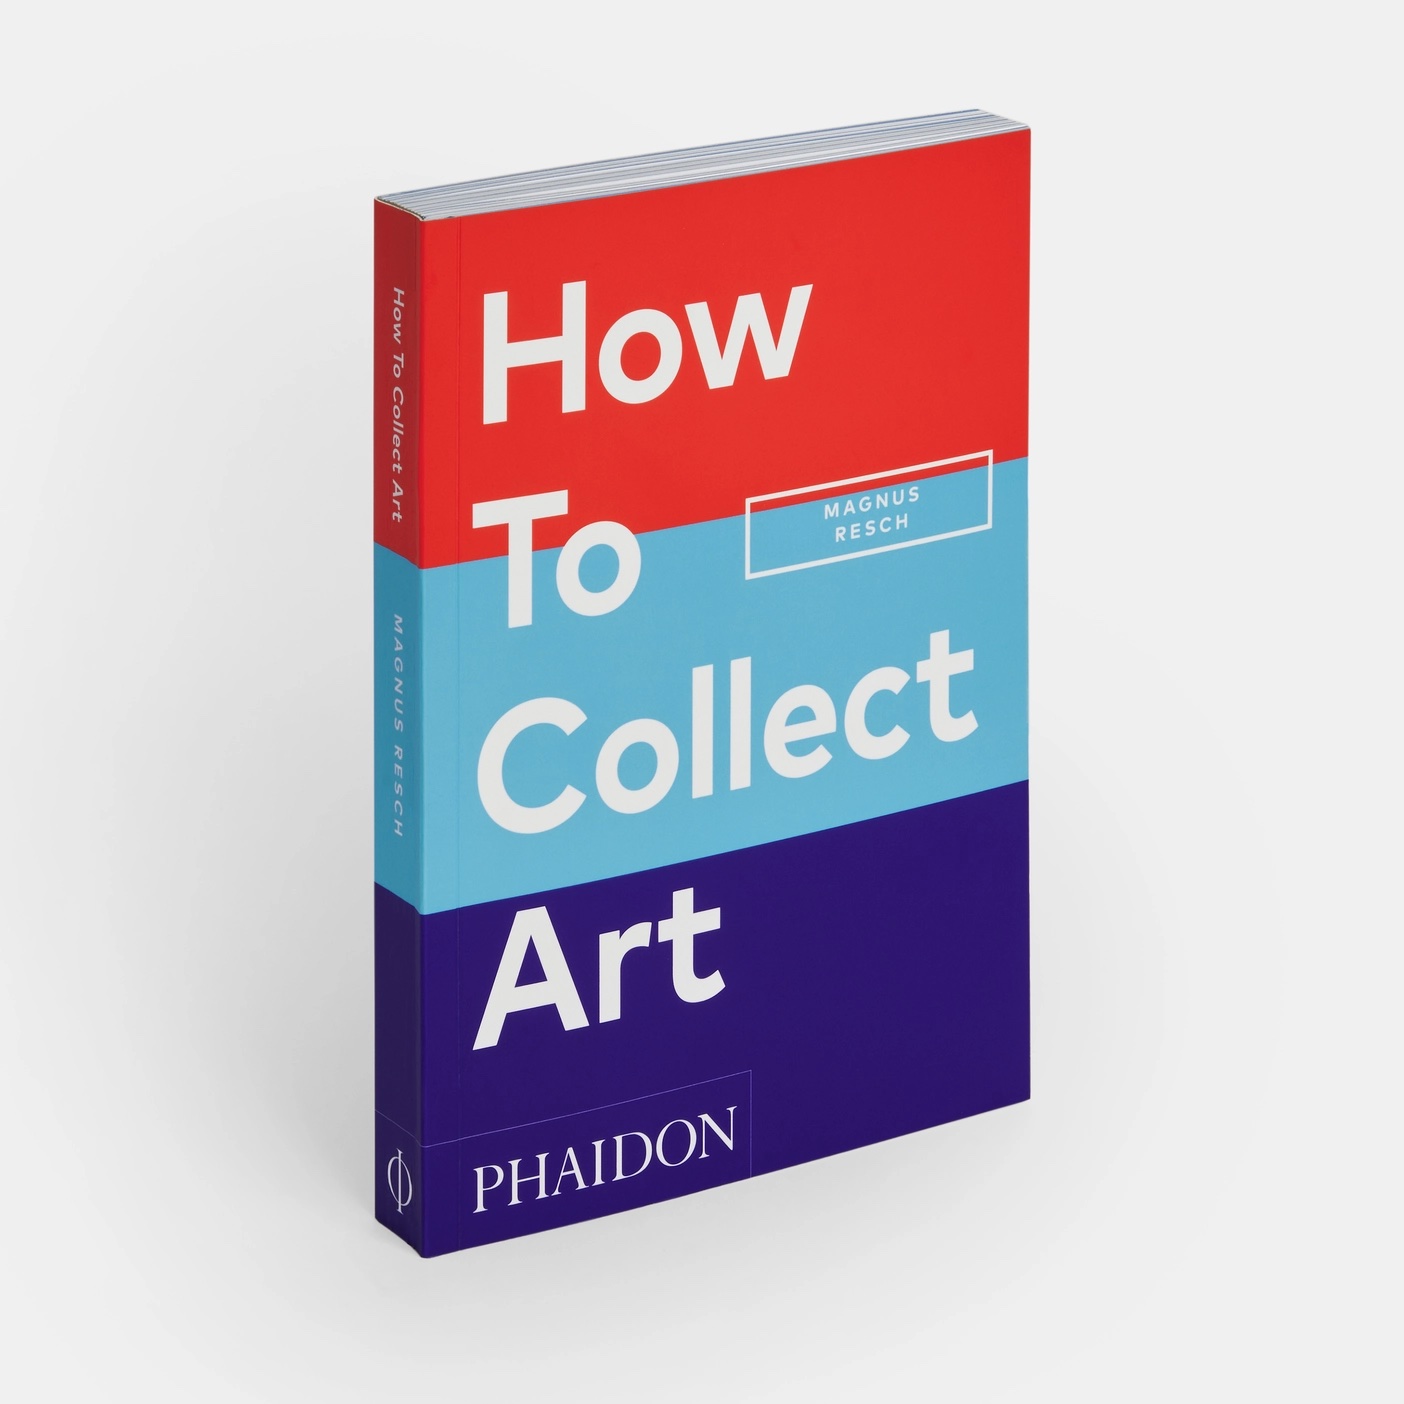 The Wick - 'How to Collect Art' by Magnus Resch, with an introduction by Pamela J. Joyner